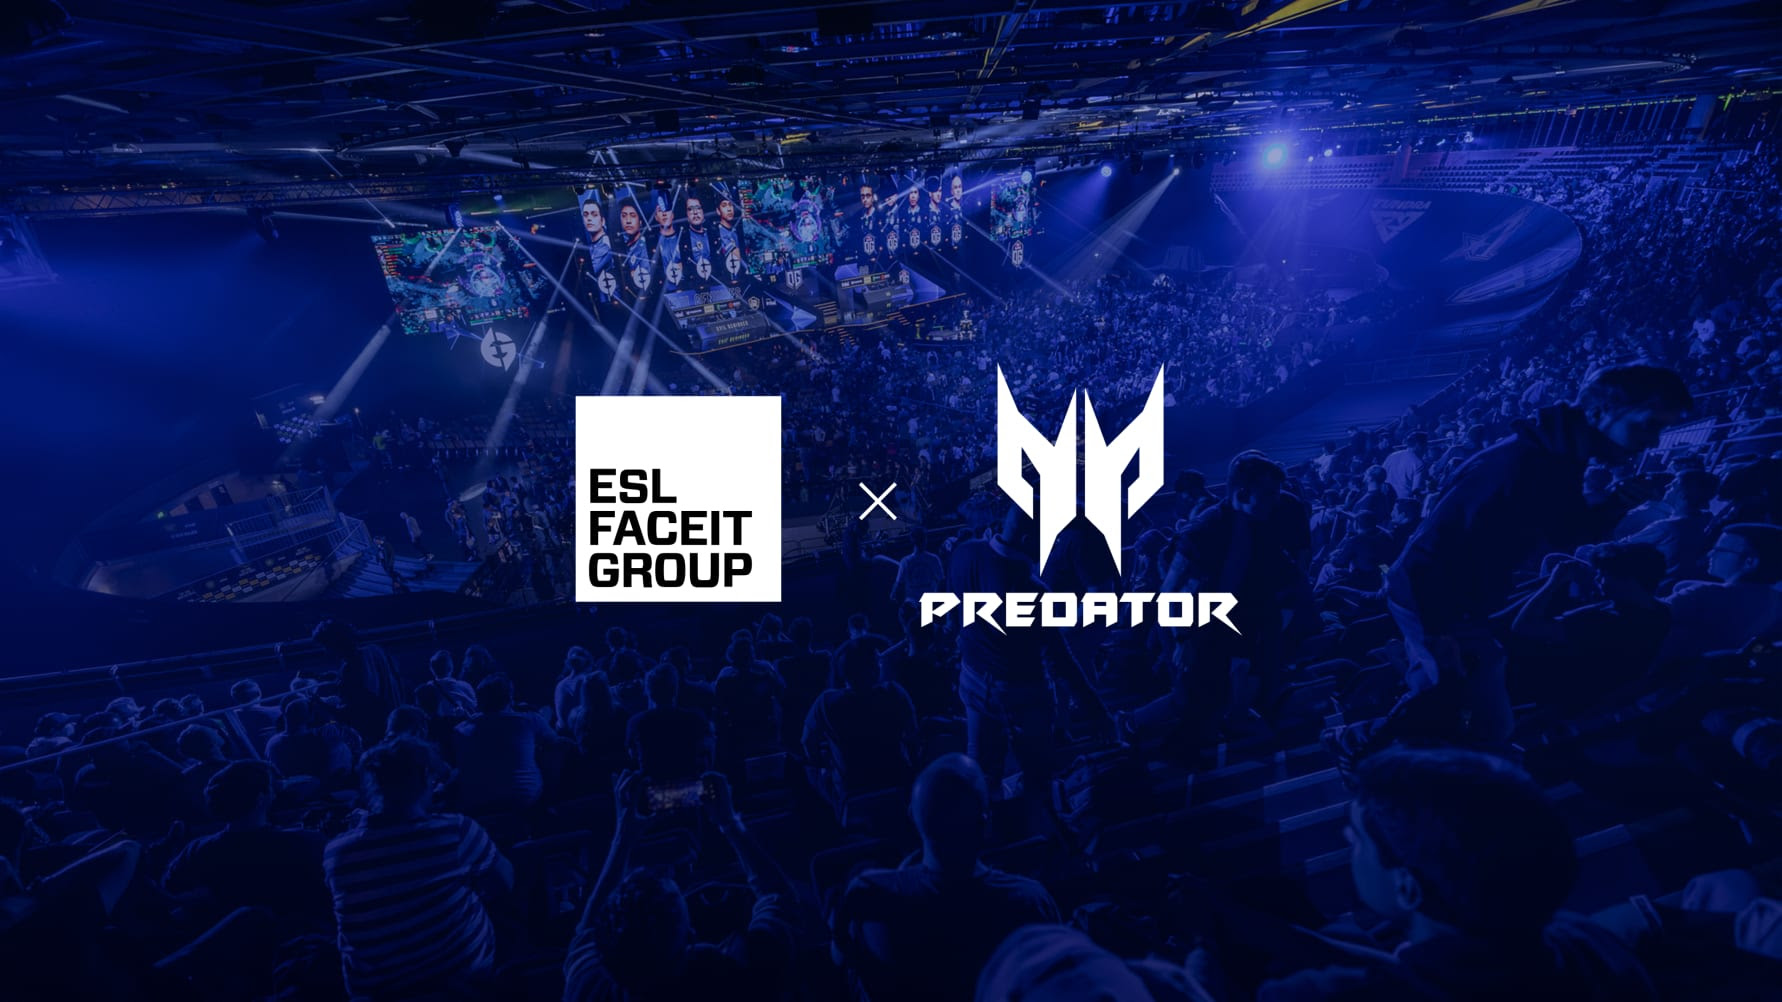 ESL FACEIT Group expands partnership with Acer and Intel